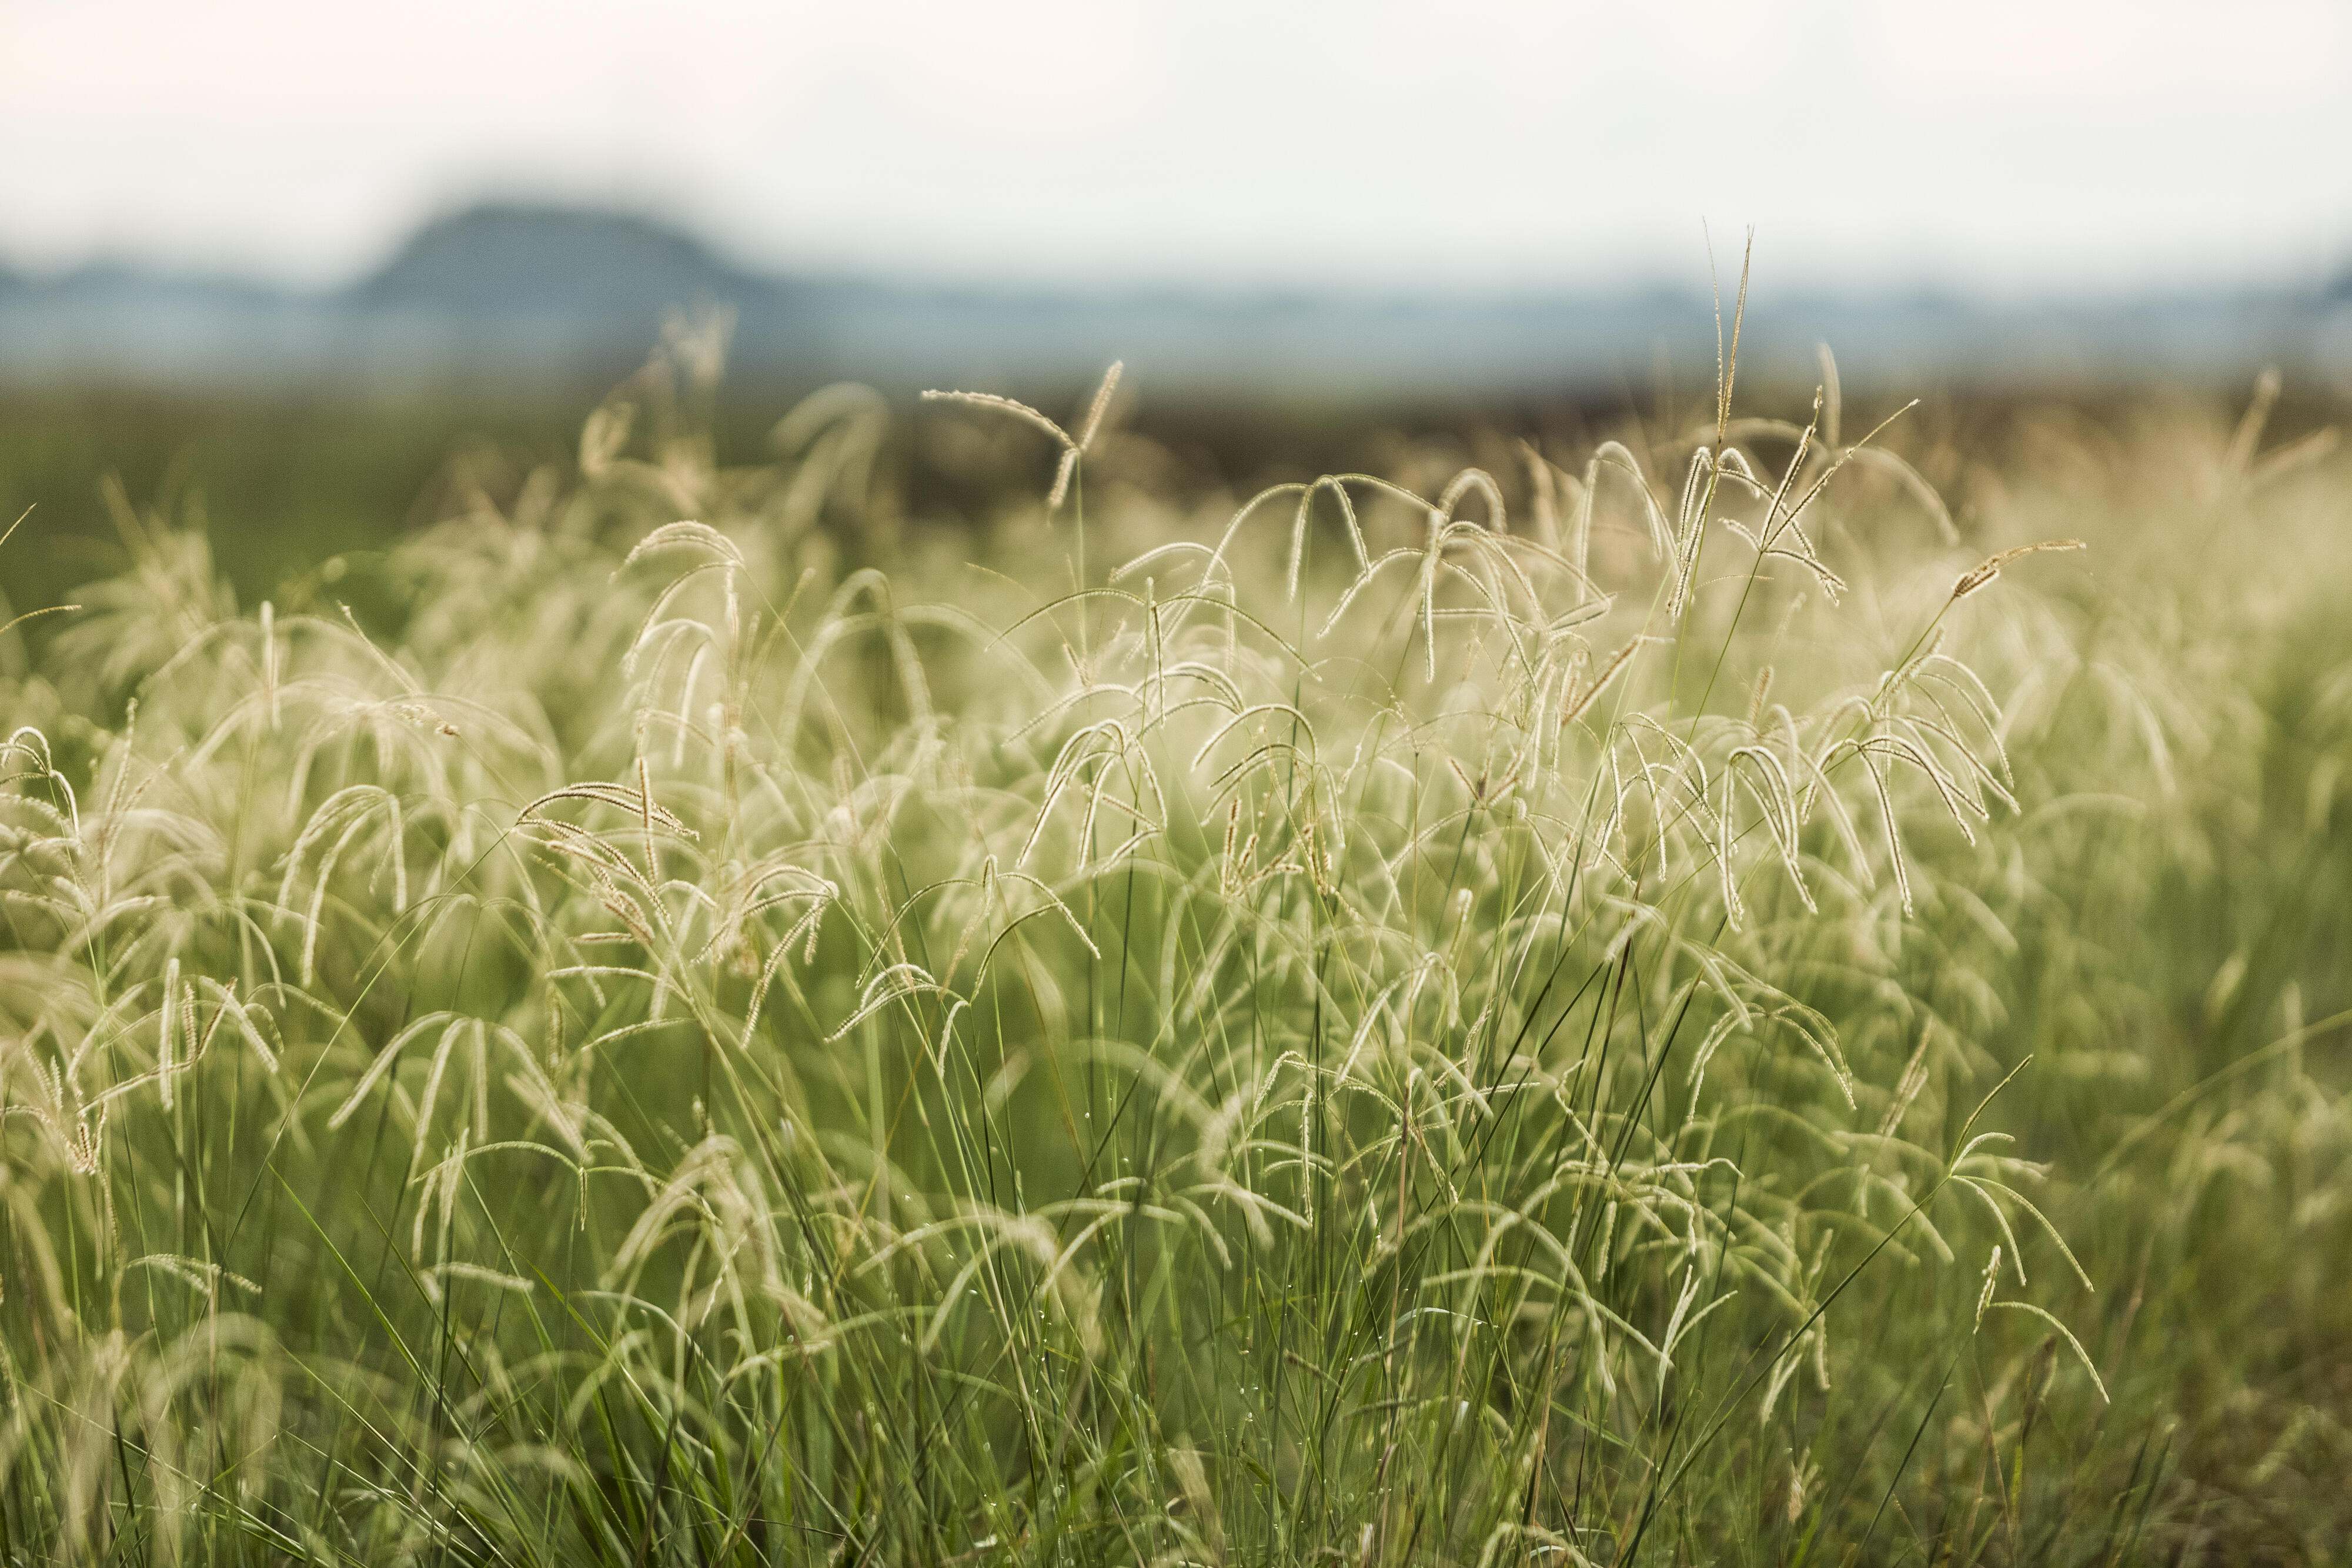 A field of longstem grass with feathery ends.